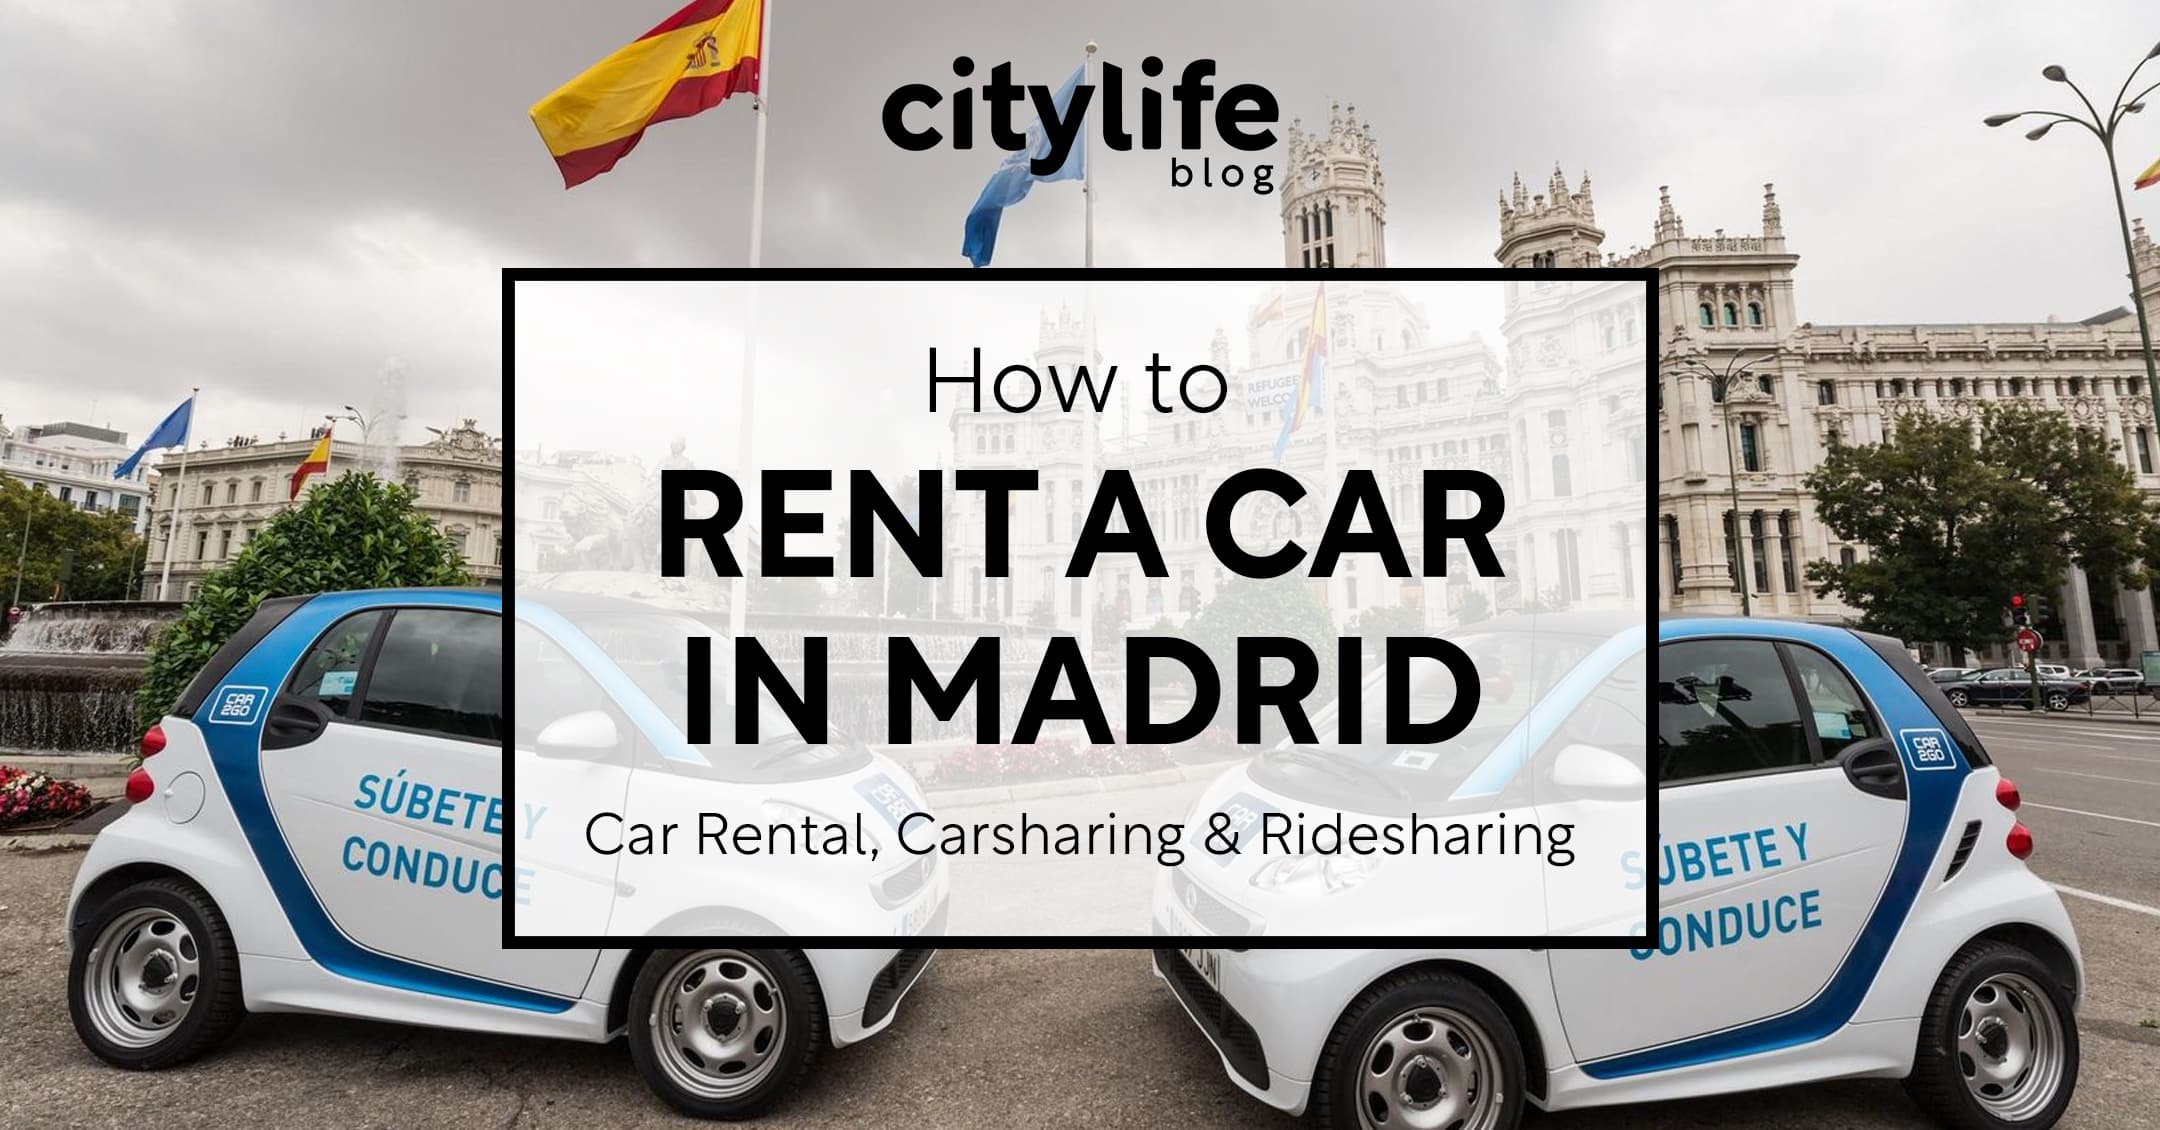 How to Rent a Car in Madrid - Car Rental, Carsharing & Ridesharing Options